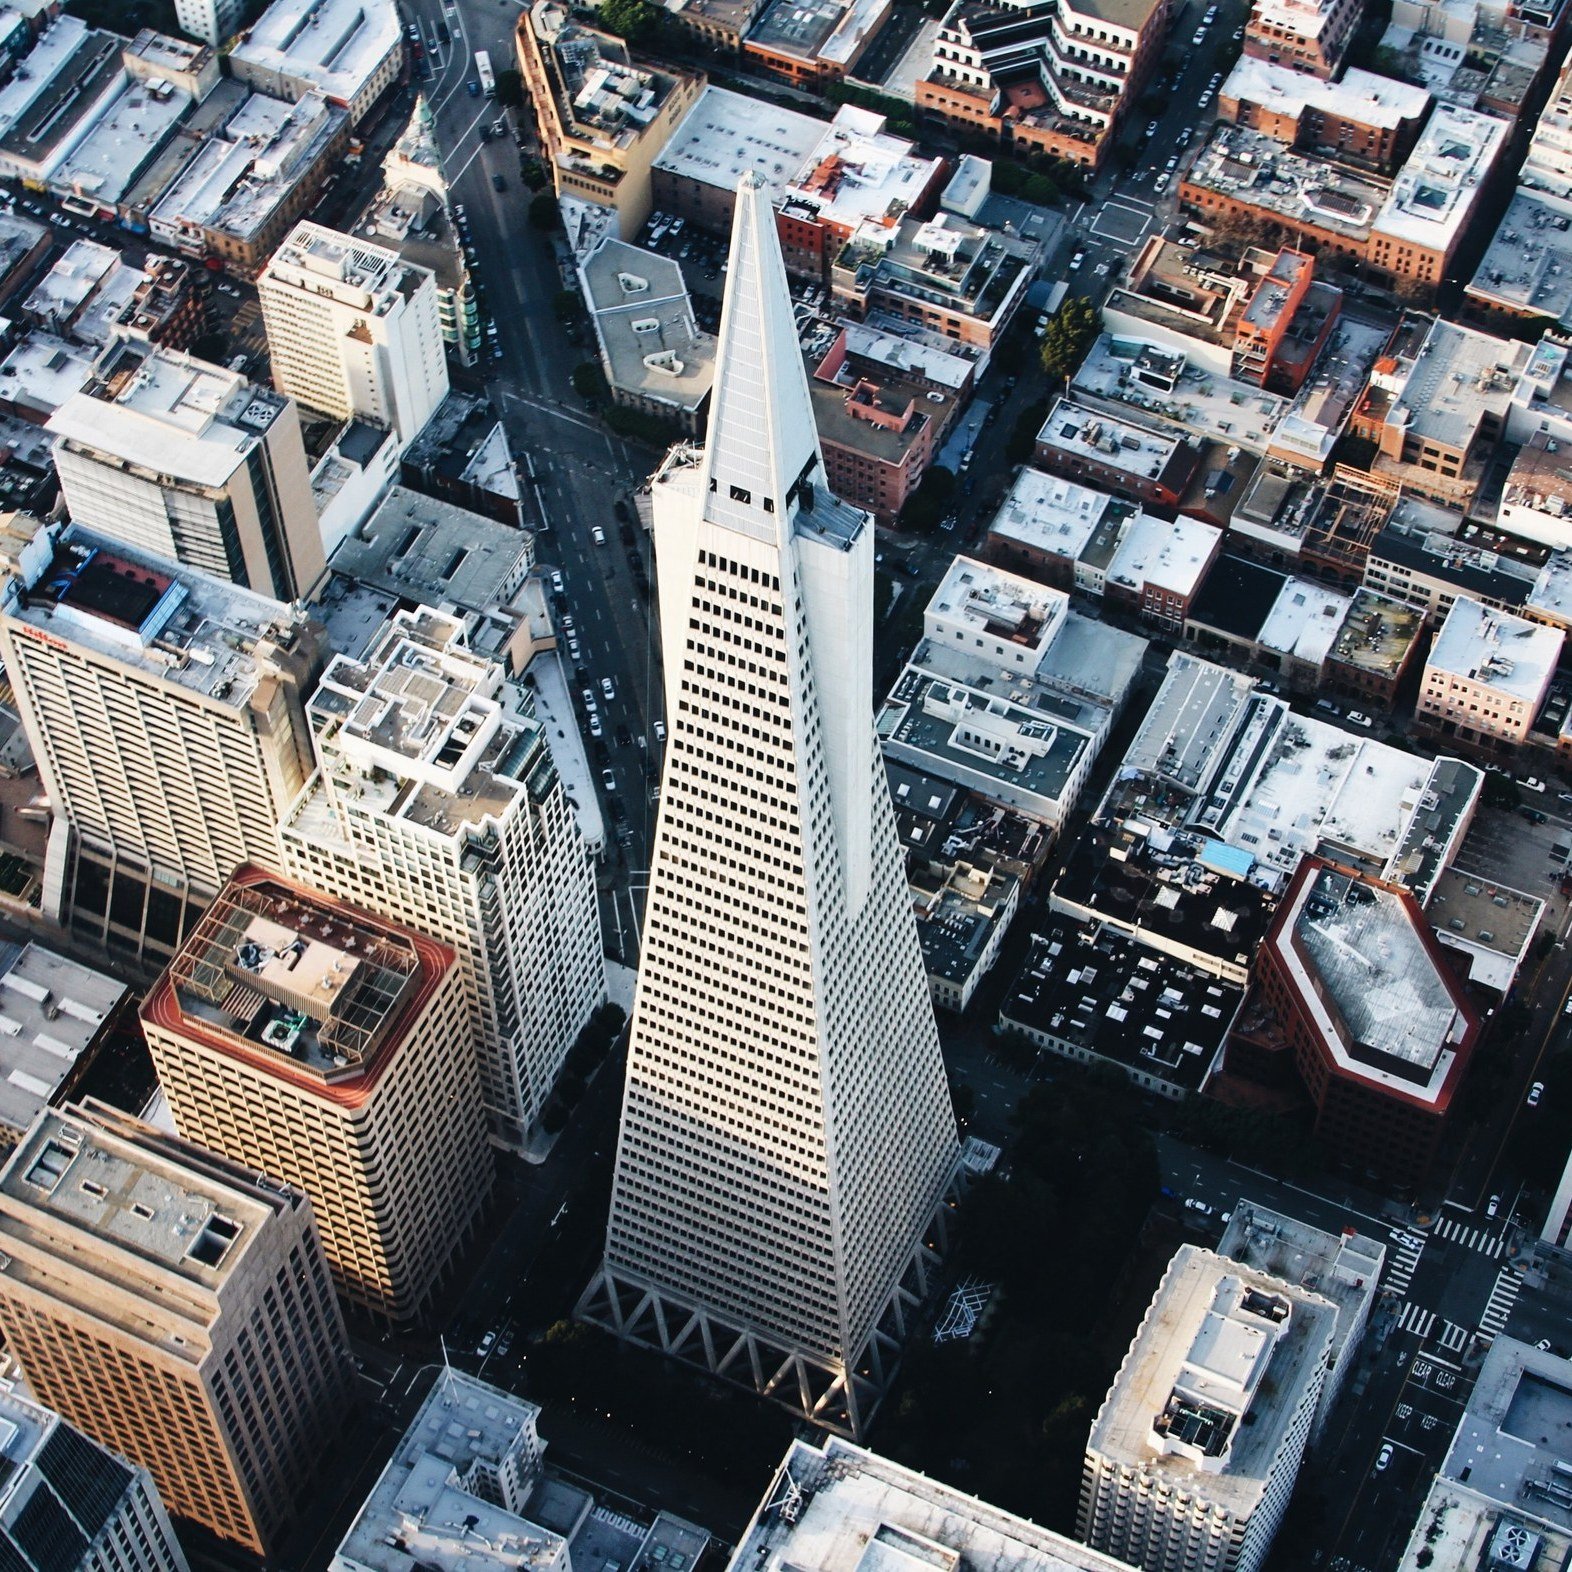 📍 Transamerica Pyramid

Formerly the tallest and still the most recognizable building in the San Francisco skyline, located among the skyscrapers and highrises of the Financial District. This prominent tower at 853 feet high features a white quartz 